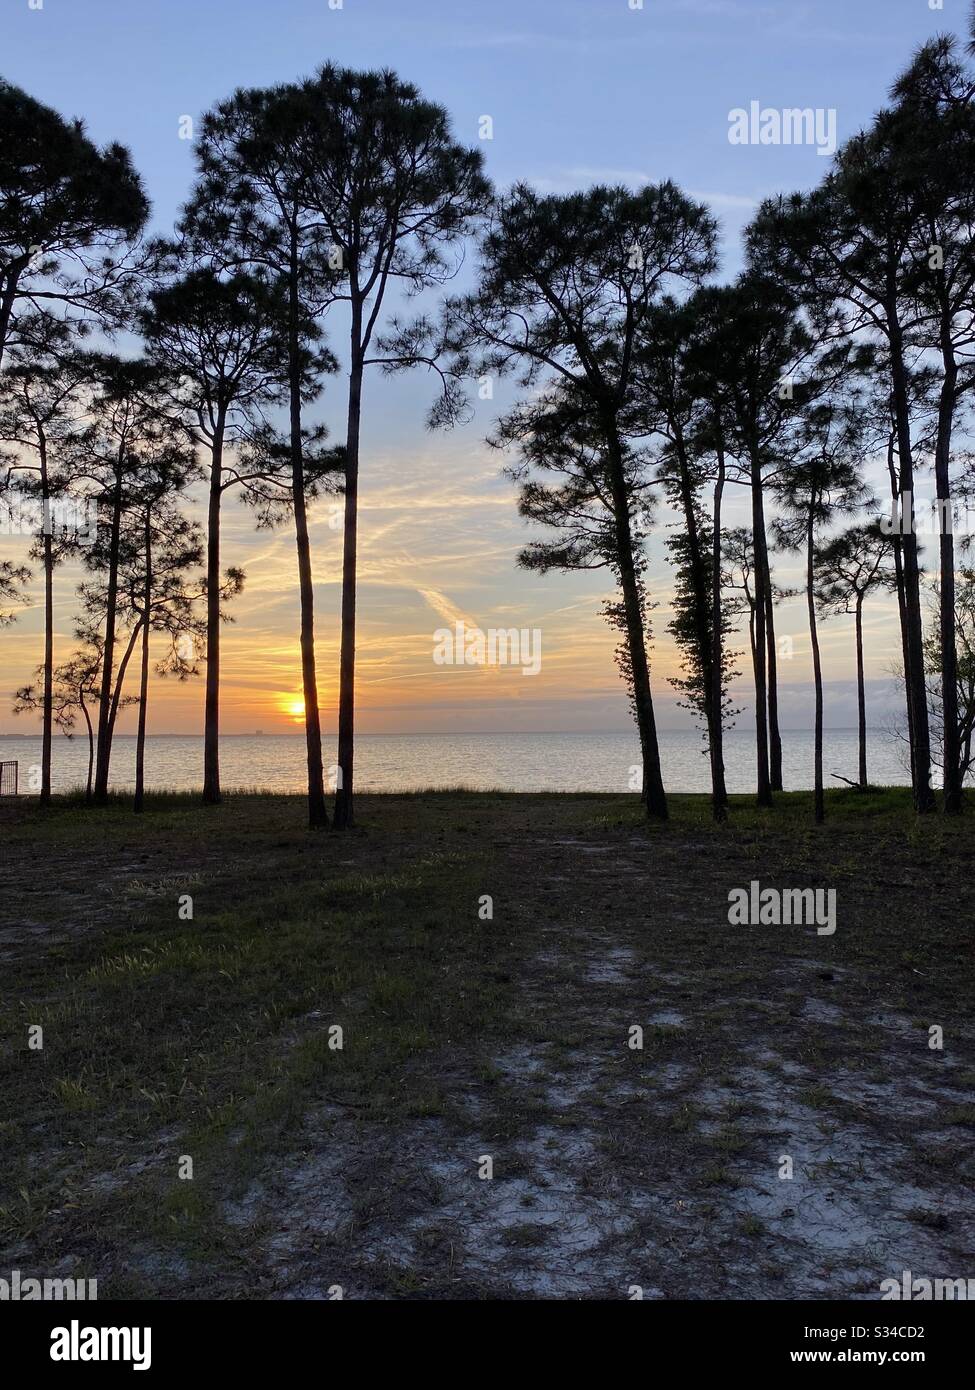 Sunset on the Choctawhatchee Bay in Florida with pine tree silhouettes Stock Photo